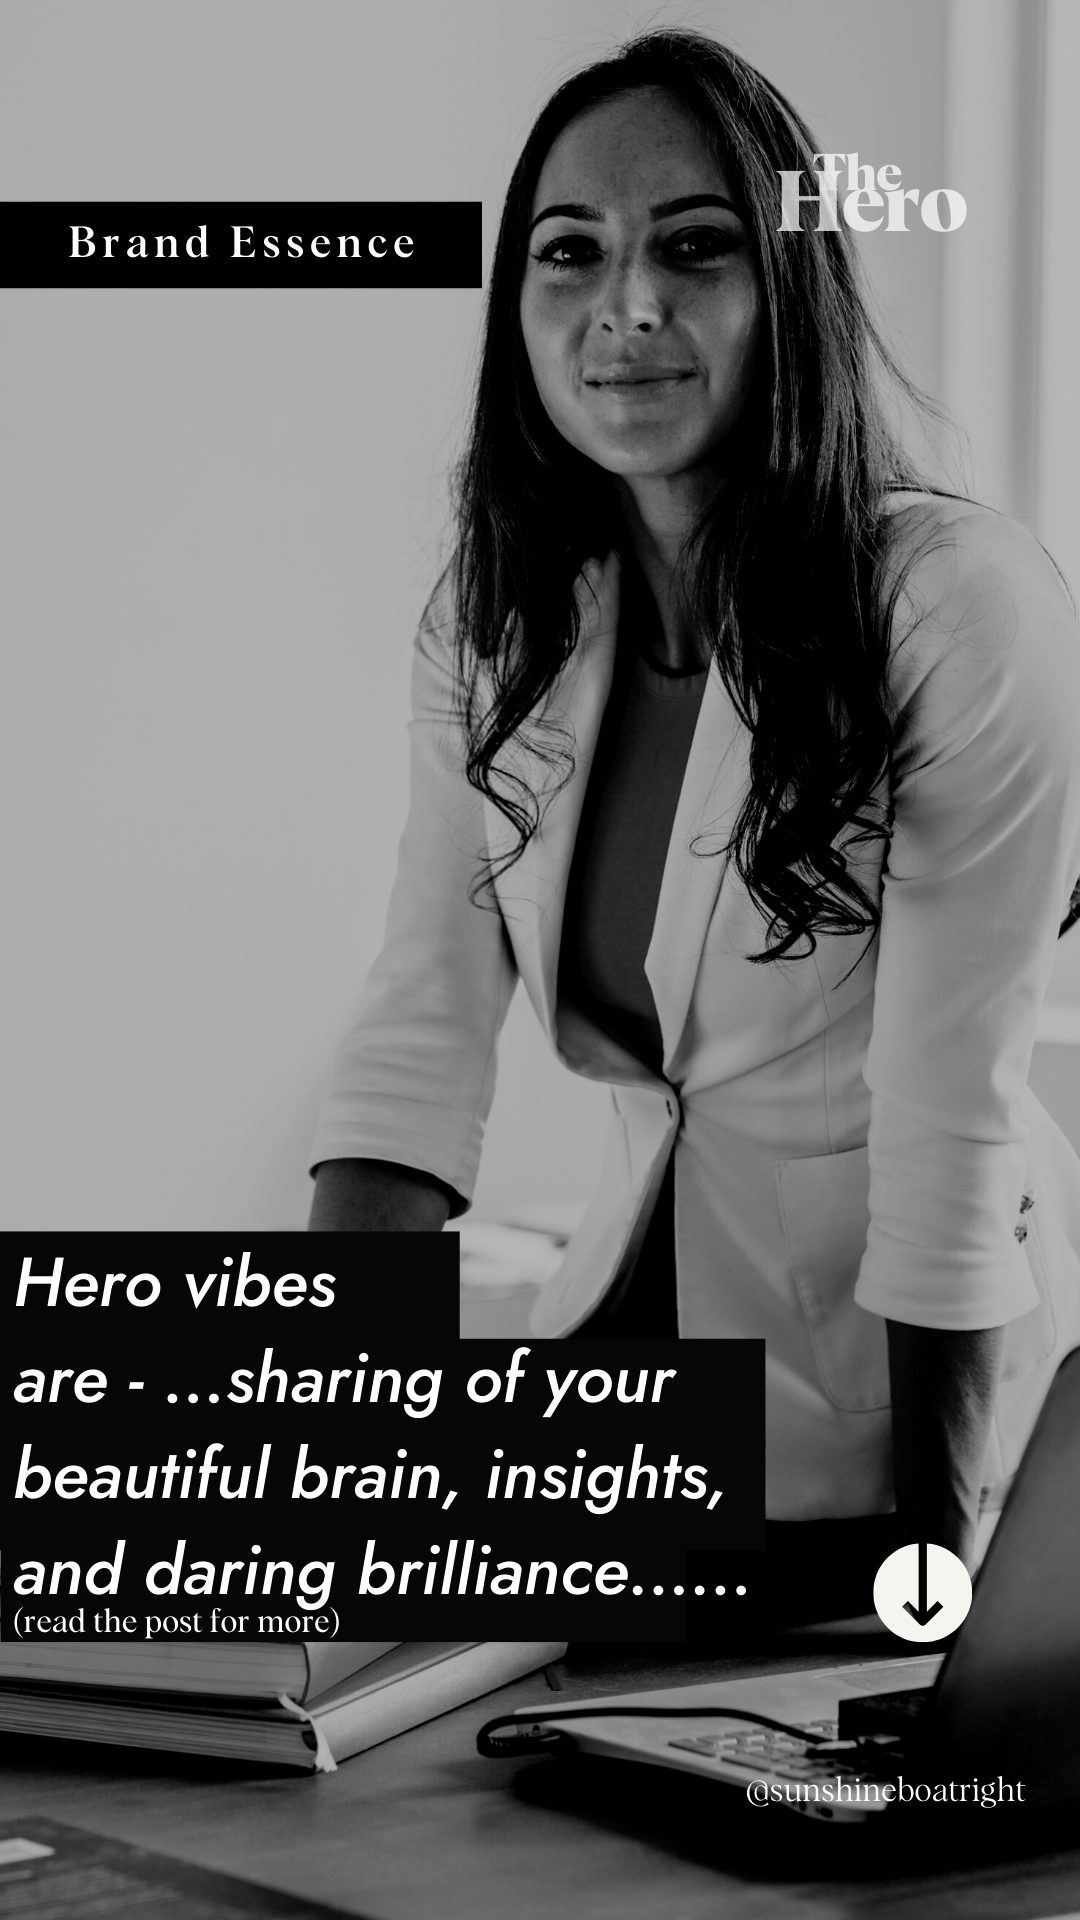 Brand Archetype Essence: Hero vibes are sharing of your beautiful brain, insights, and daring brilliance.